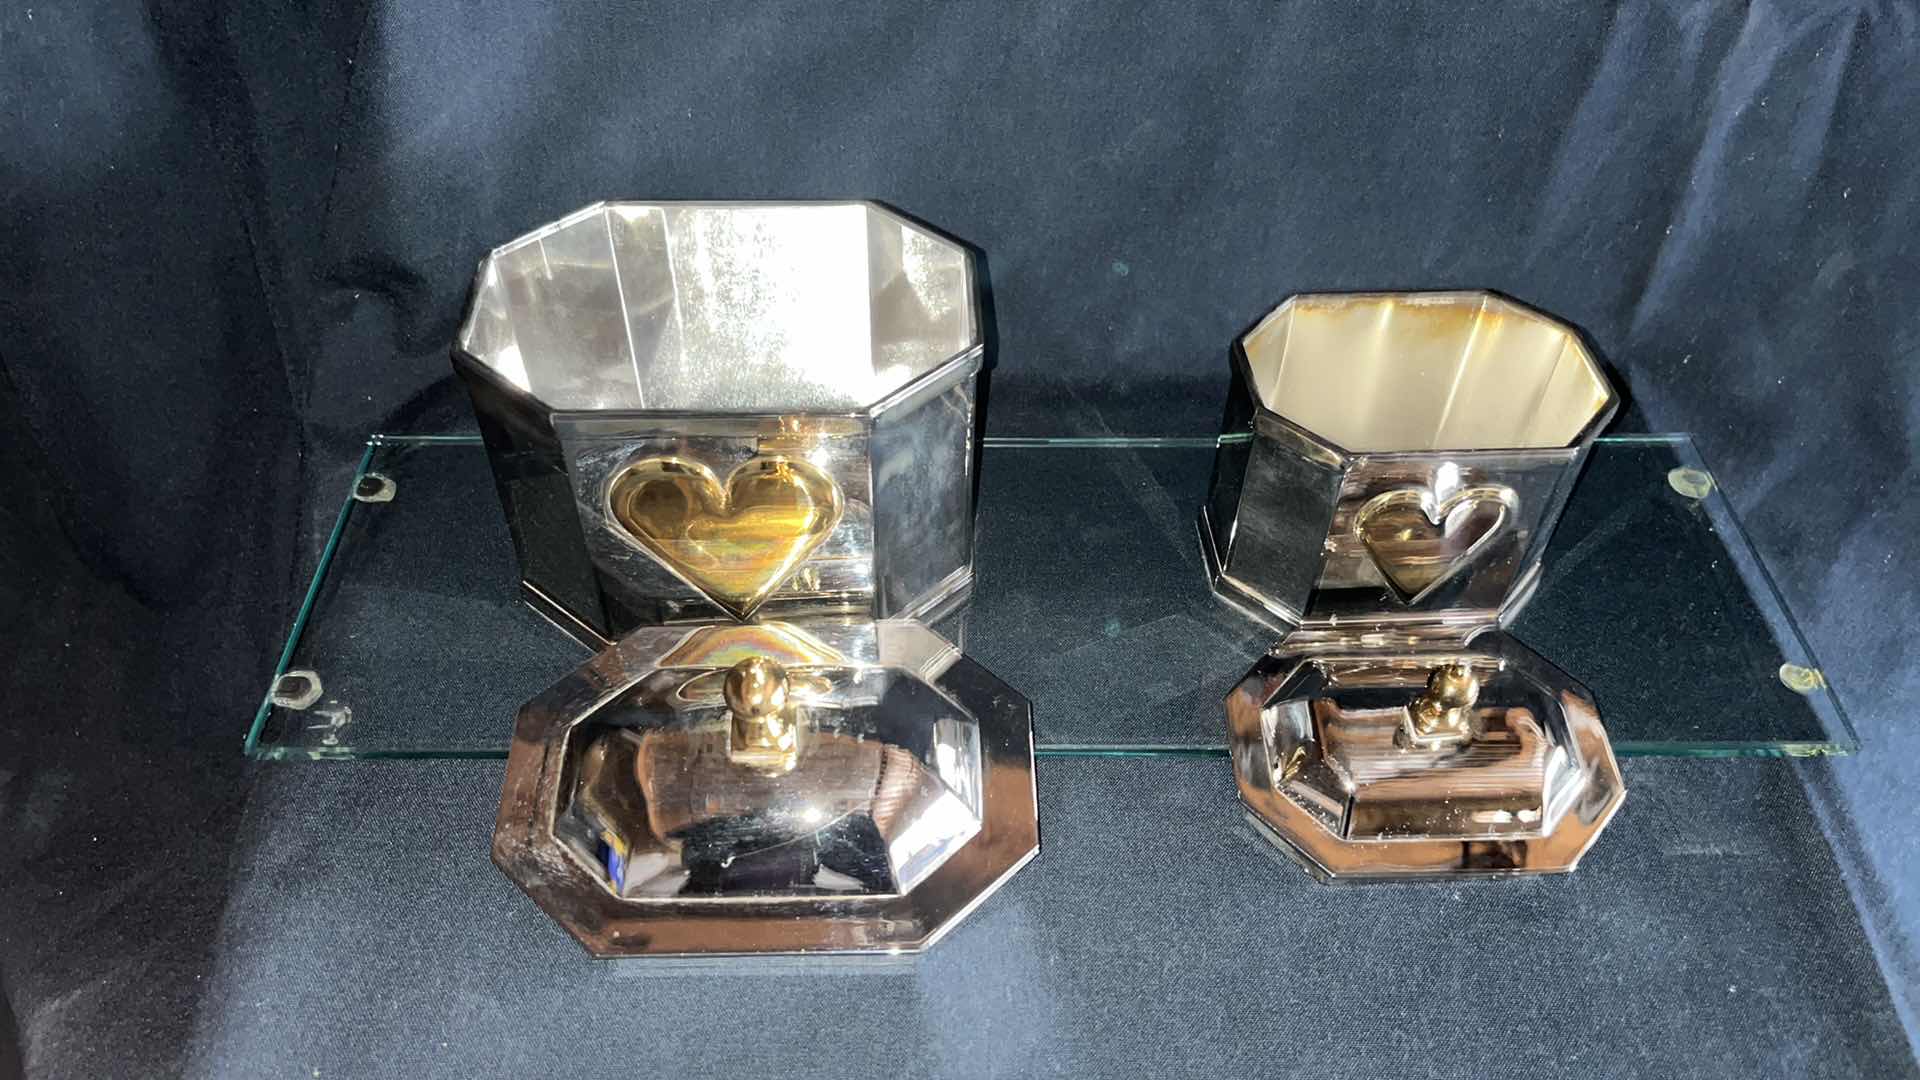 Photo 6 of VINTAGE LENNOX WILLIAMSBURG KIRK STIEFF SILVER PLATED HEART TRINKET BOXES (2) W ATTACHED GLASS 5.25” X 18.25” X 6.25”